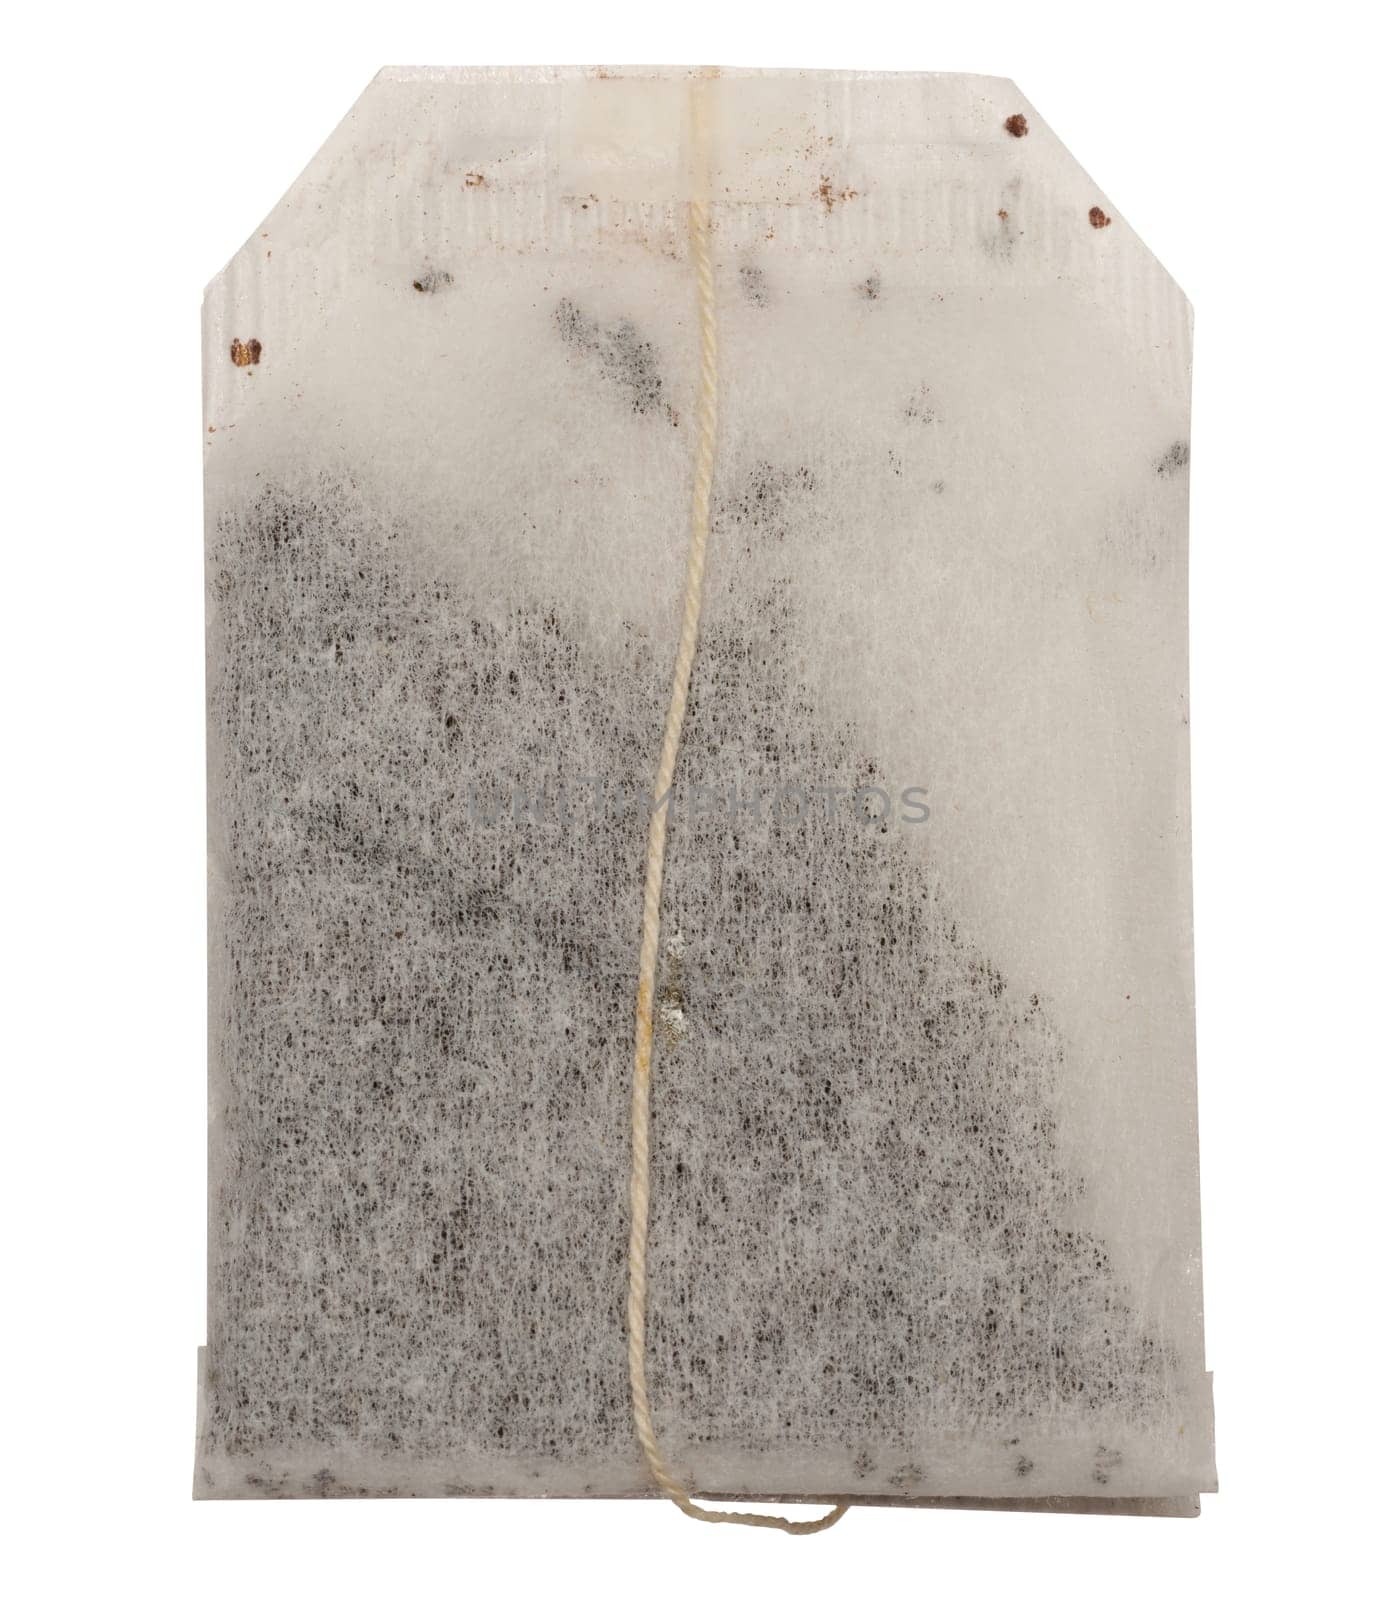 Disposable tea bag on isolated background, close up